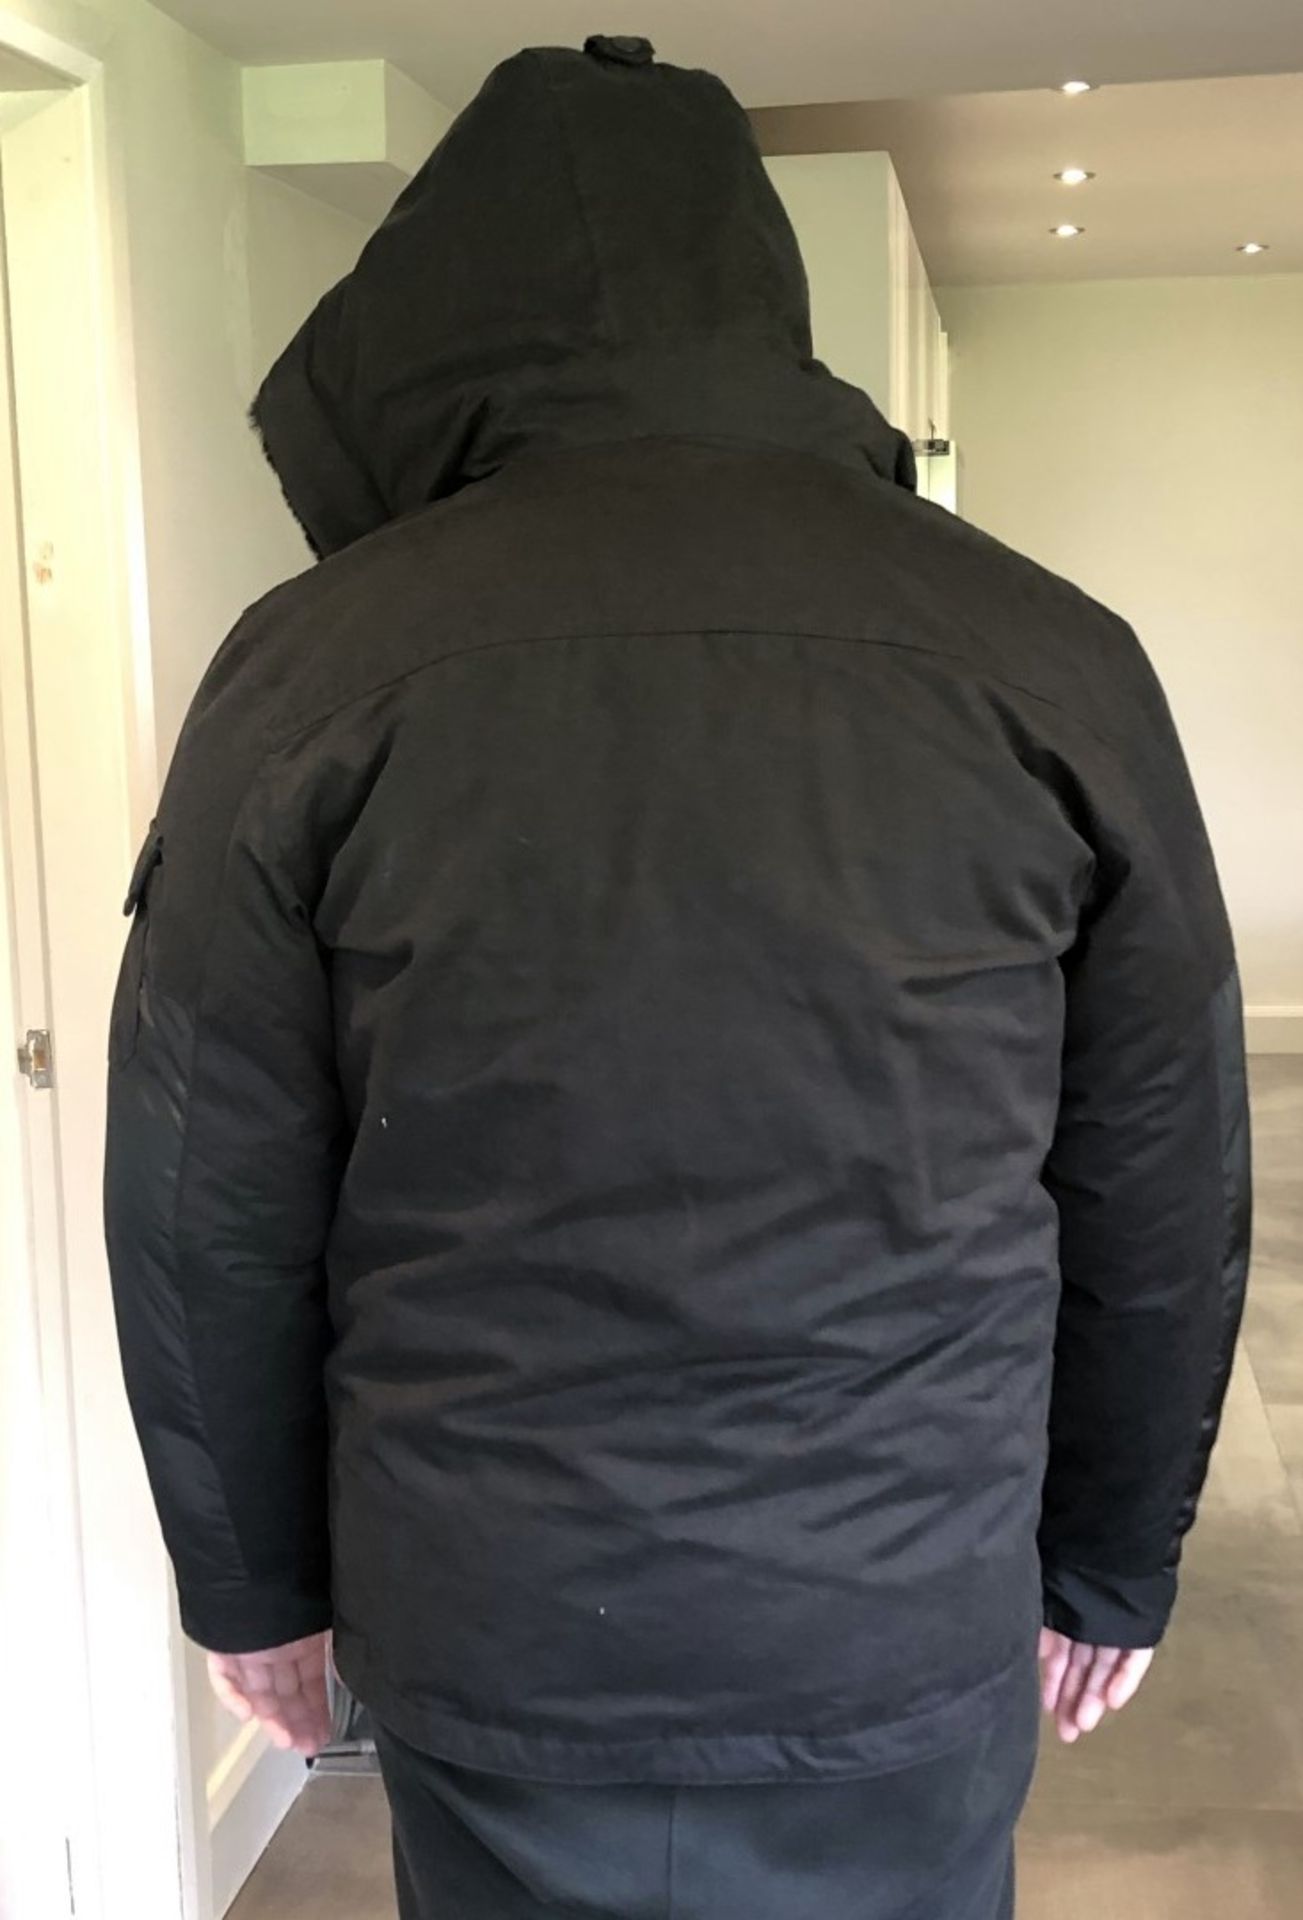 1 x Men's Genuine Zara Coat In Black With A Faux Fur Lined Hood - Size (EU/UK): XL/XL - Preowned - - Image 3 of 8